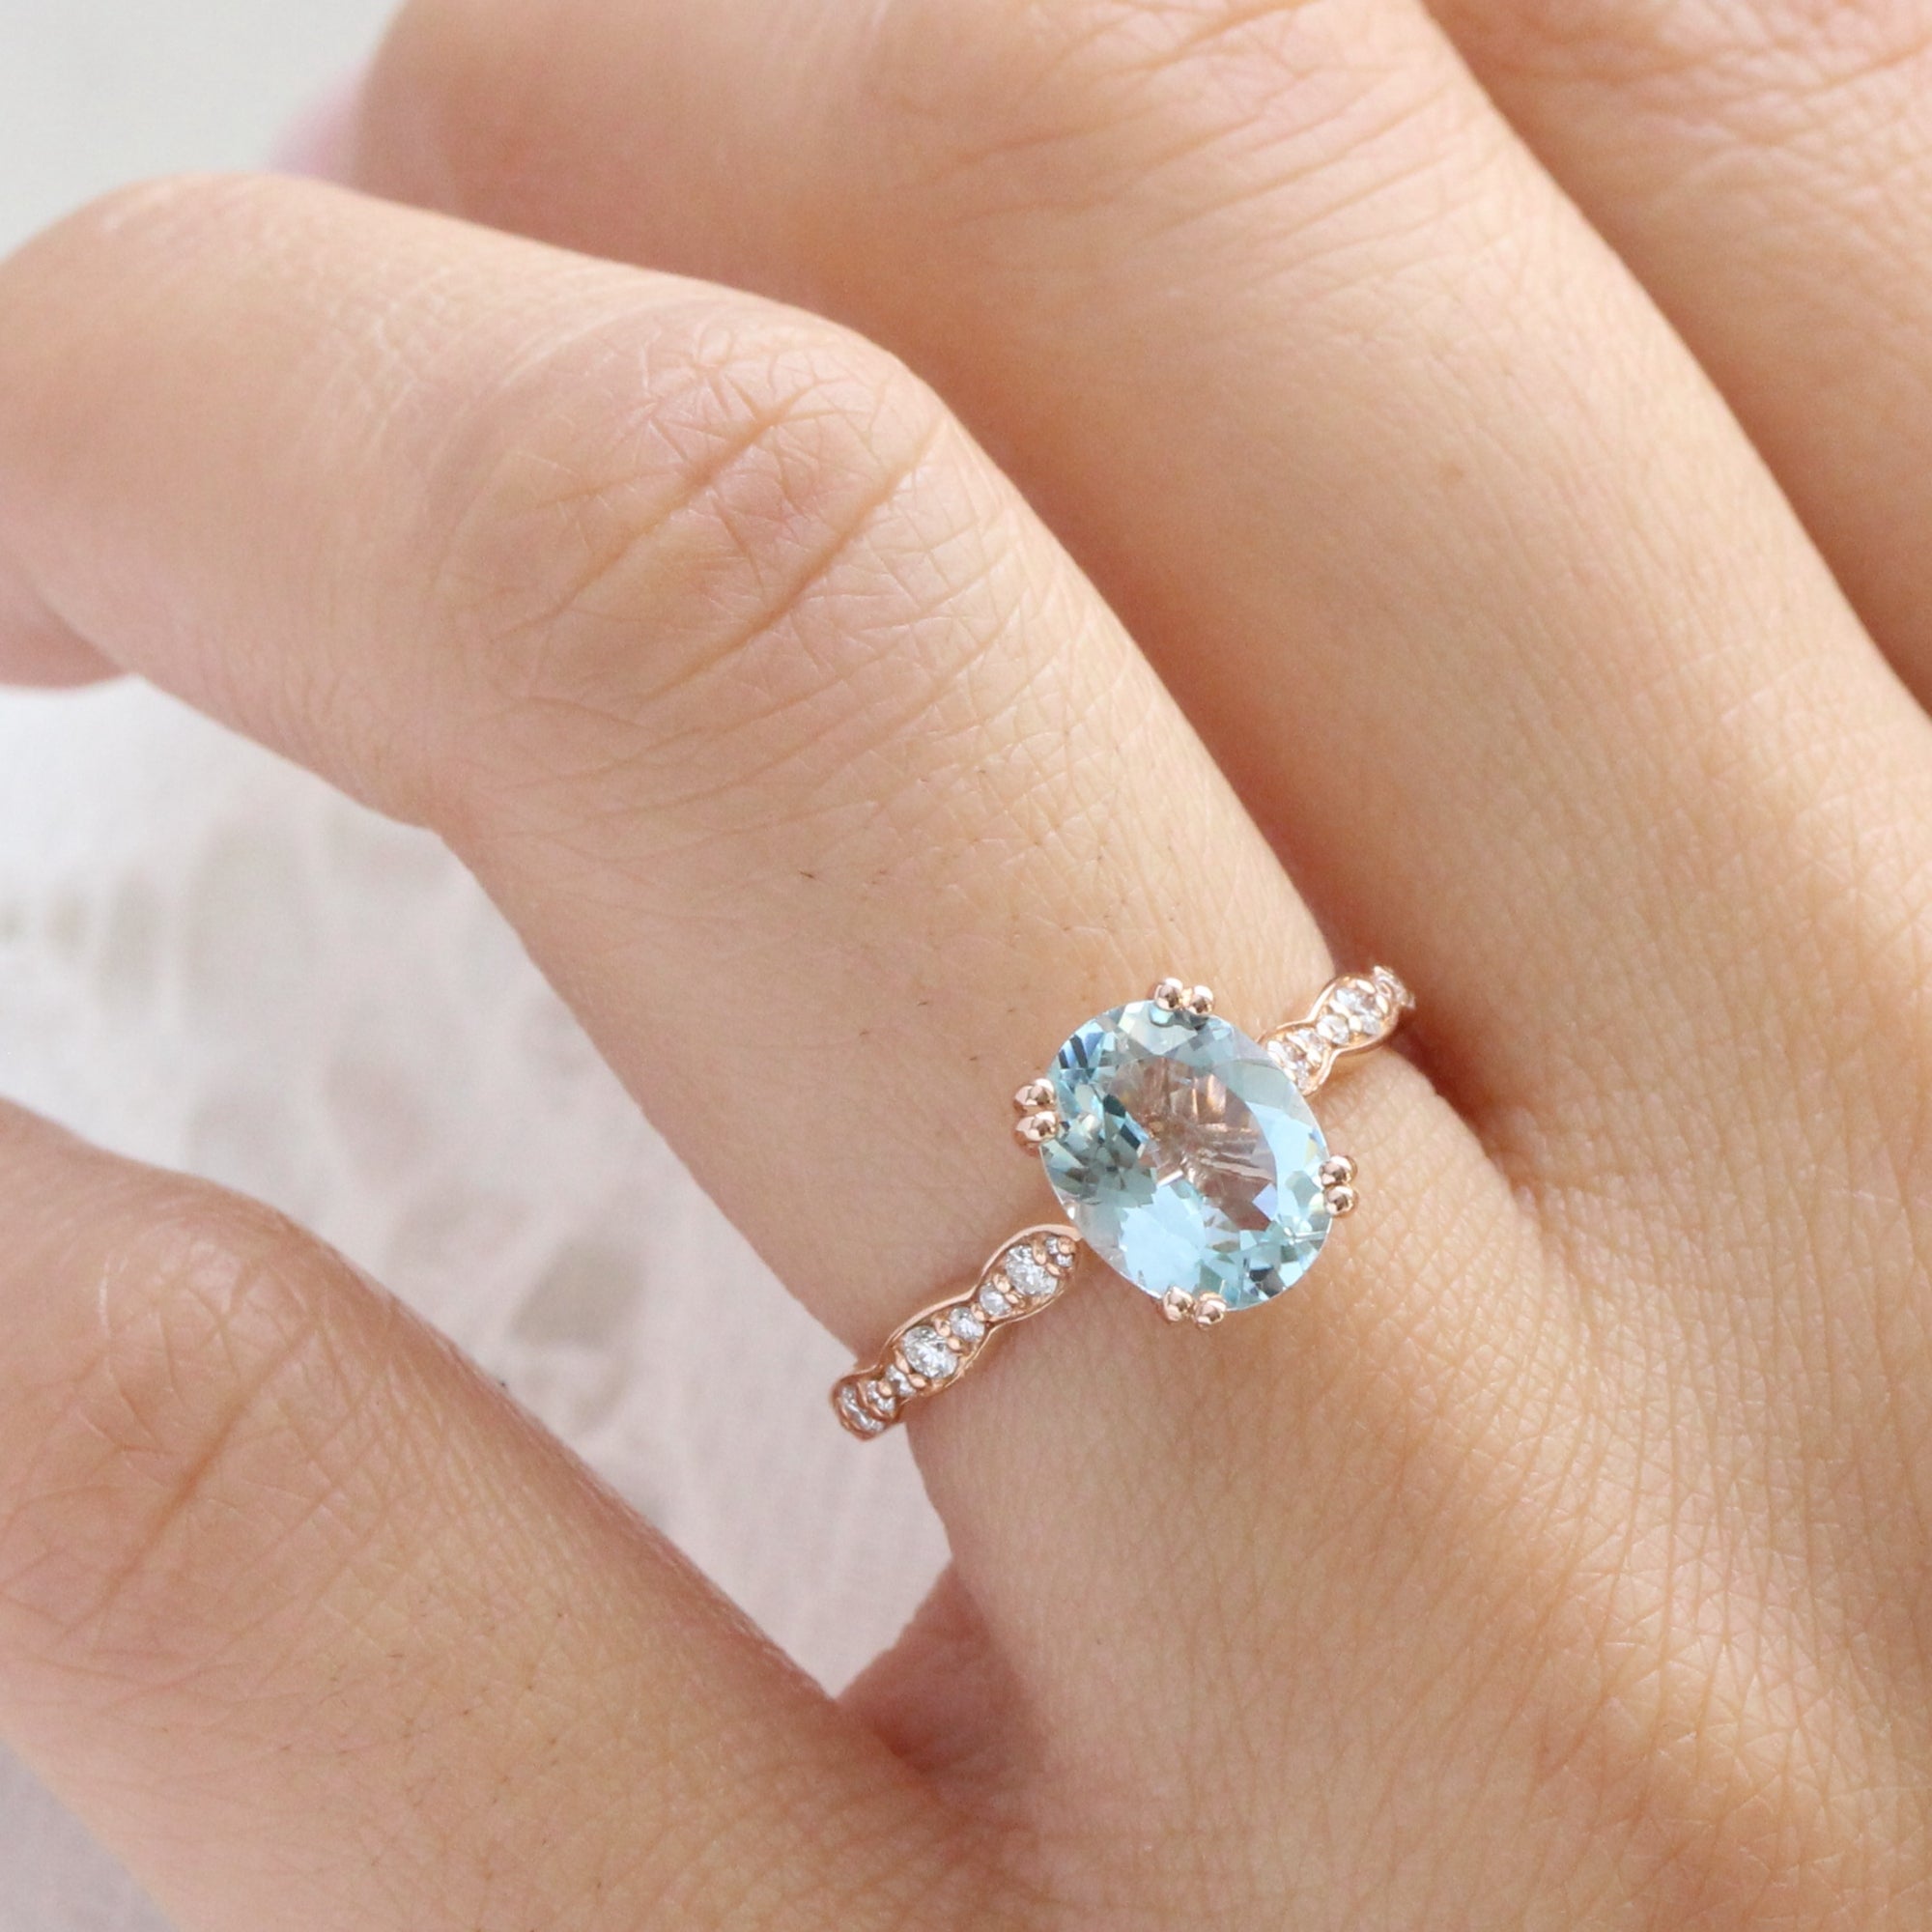 Oval Aquamarine ring rose gold solitaire engagement ring la more design jewelry